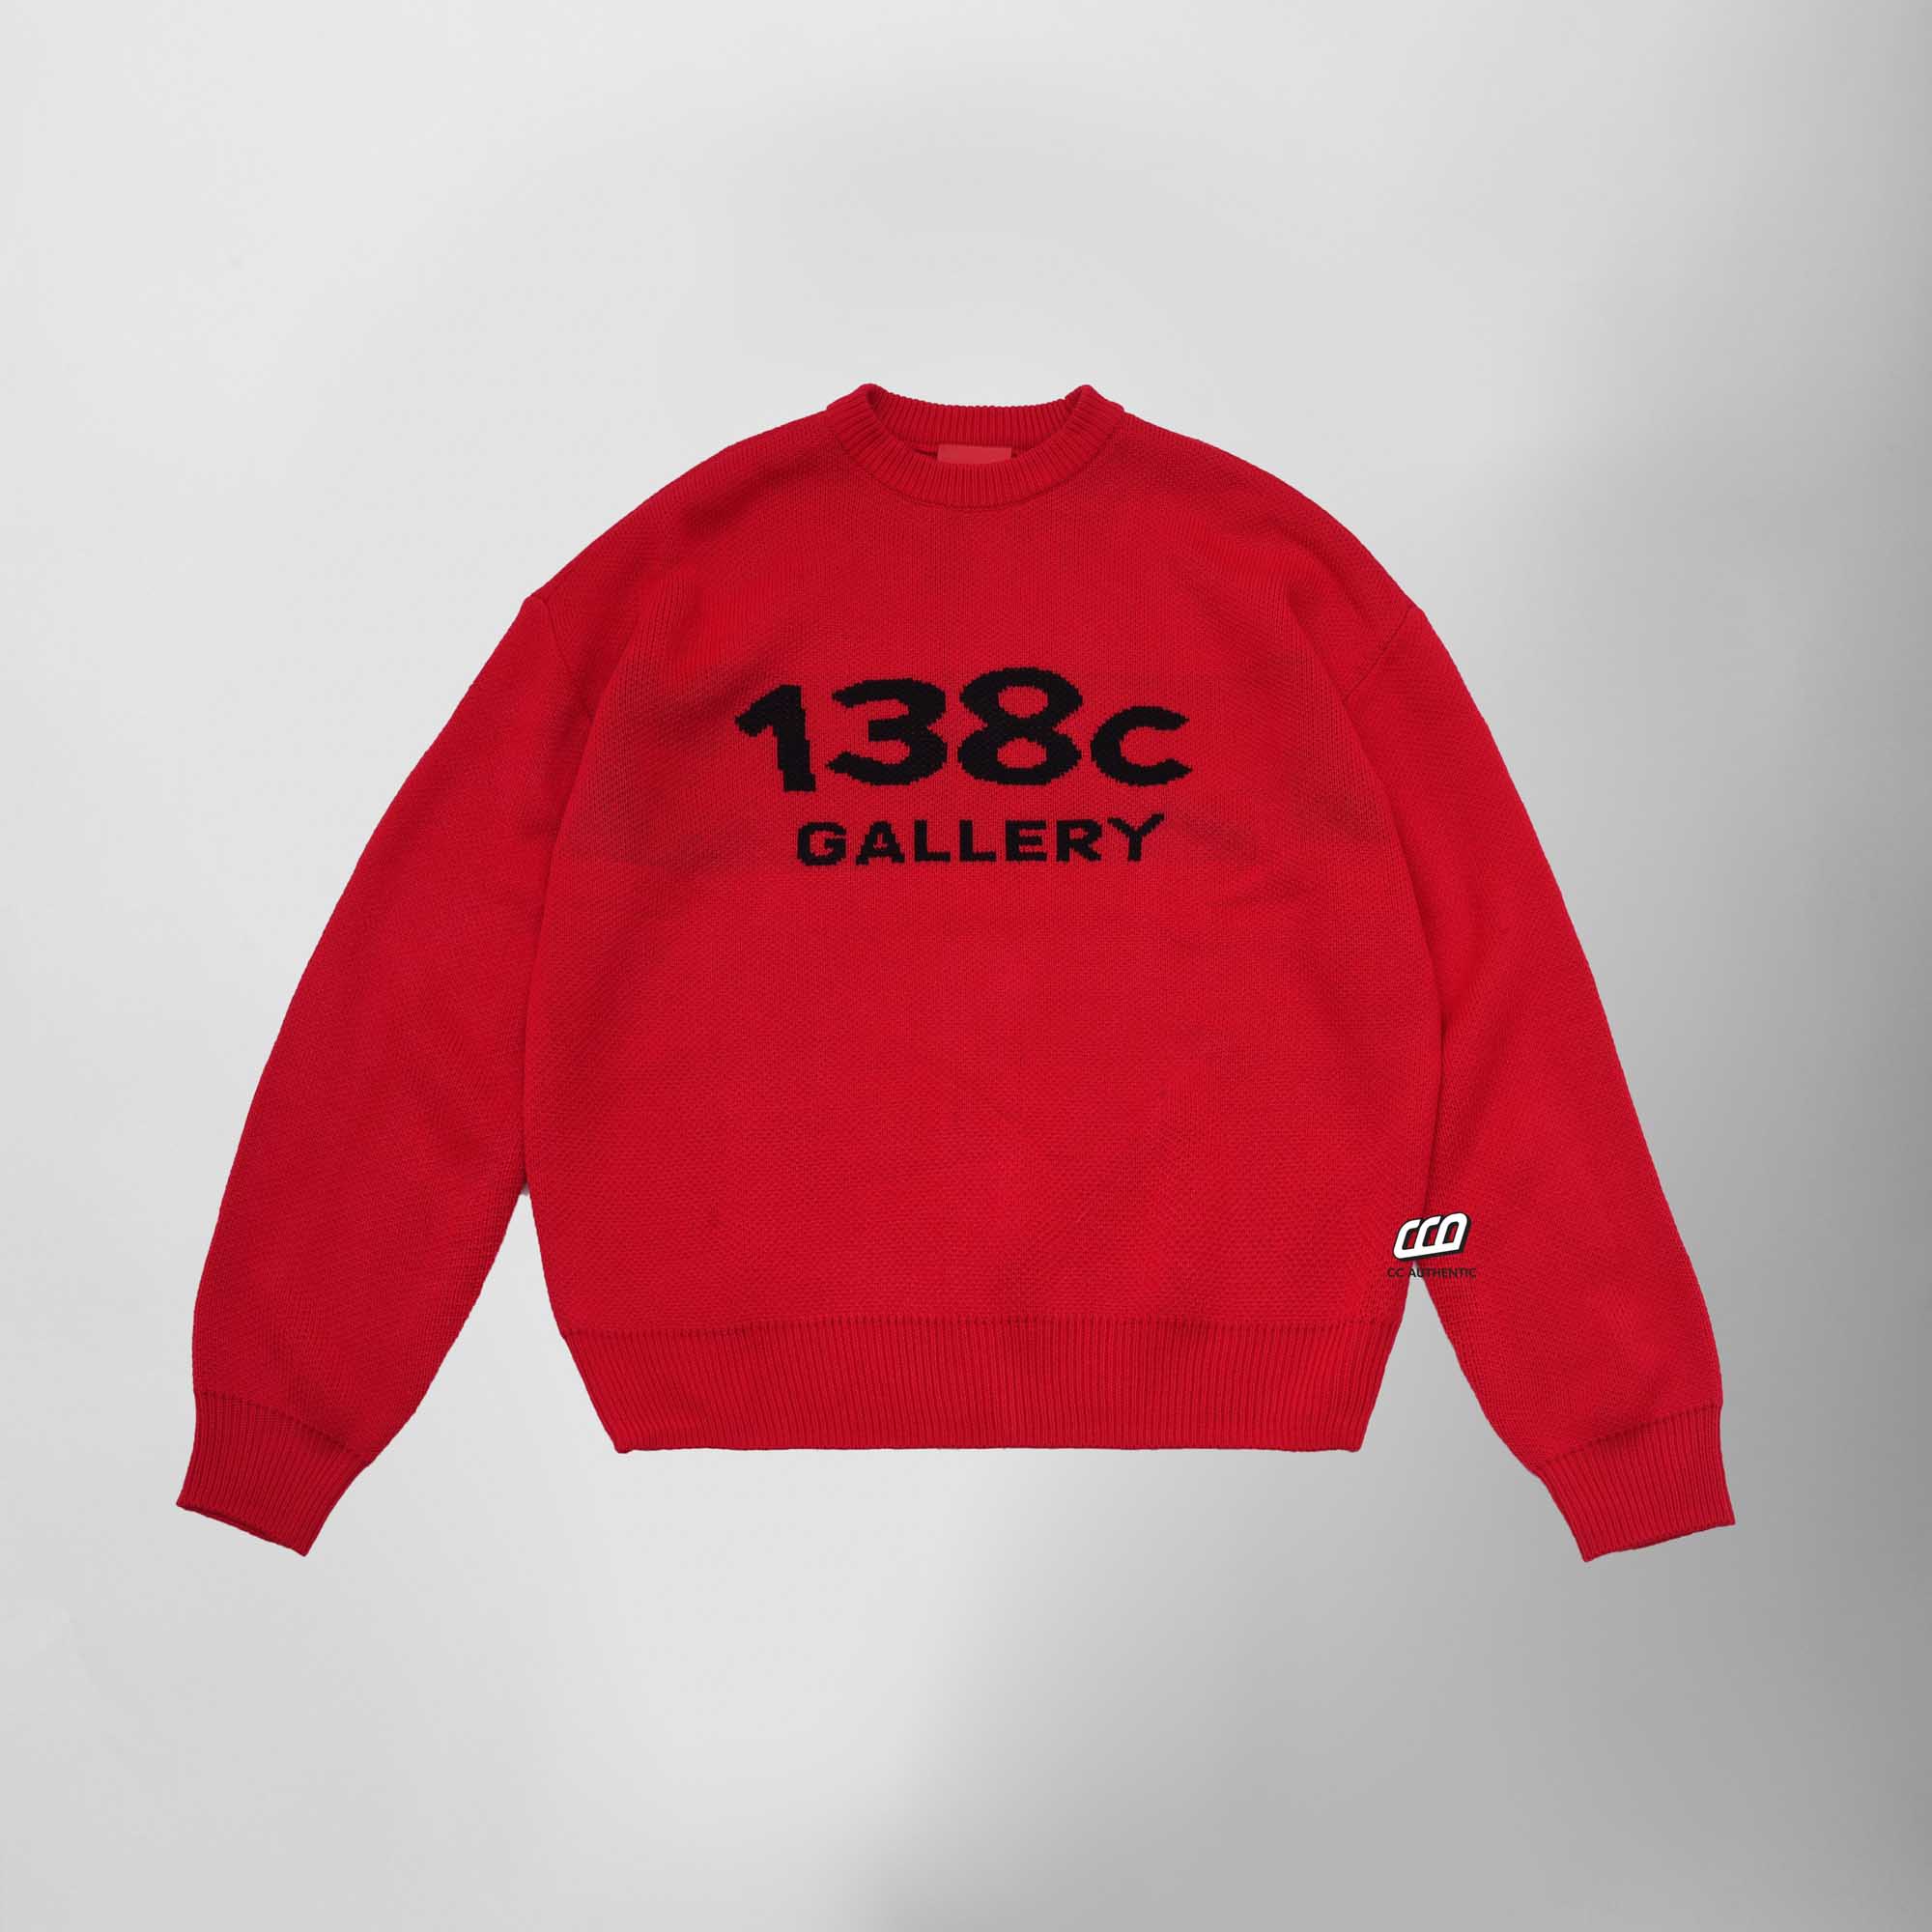 138C GALLERY RED LOVE KNIT SWEATER - RED